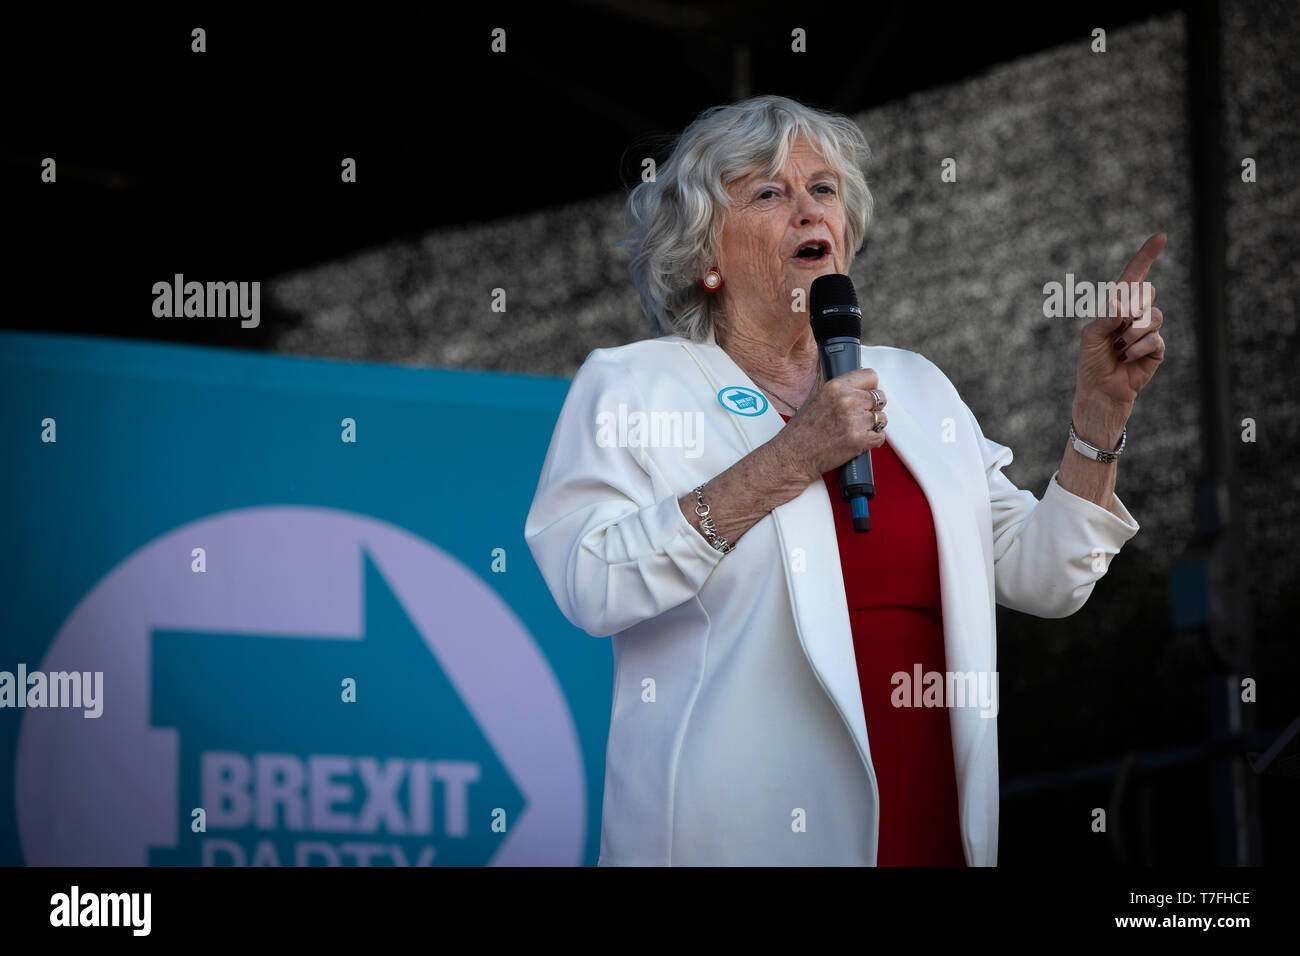 Former Conservative party government minister Ann Widdecombe speaking on stage at a Brexit Party event in Chester, Cheshire. The keynote speech was given by the Brexit Party leader Nigel Farage MEP. The event was attended by around 300 people and was one of the first since the formation of the Brexit Party by Nigel Farage in Spring 2019. Stock Photo